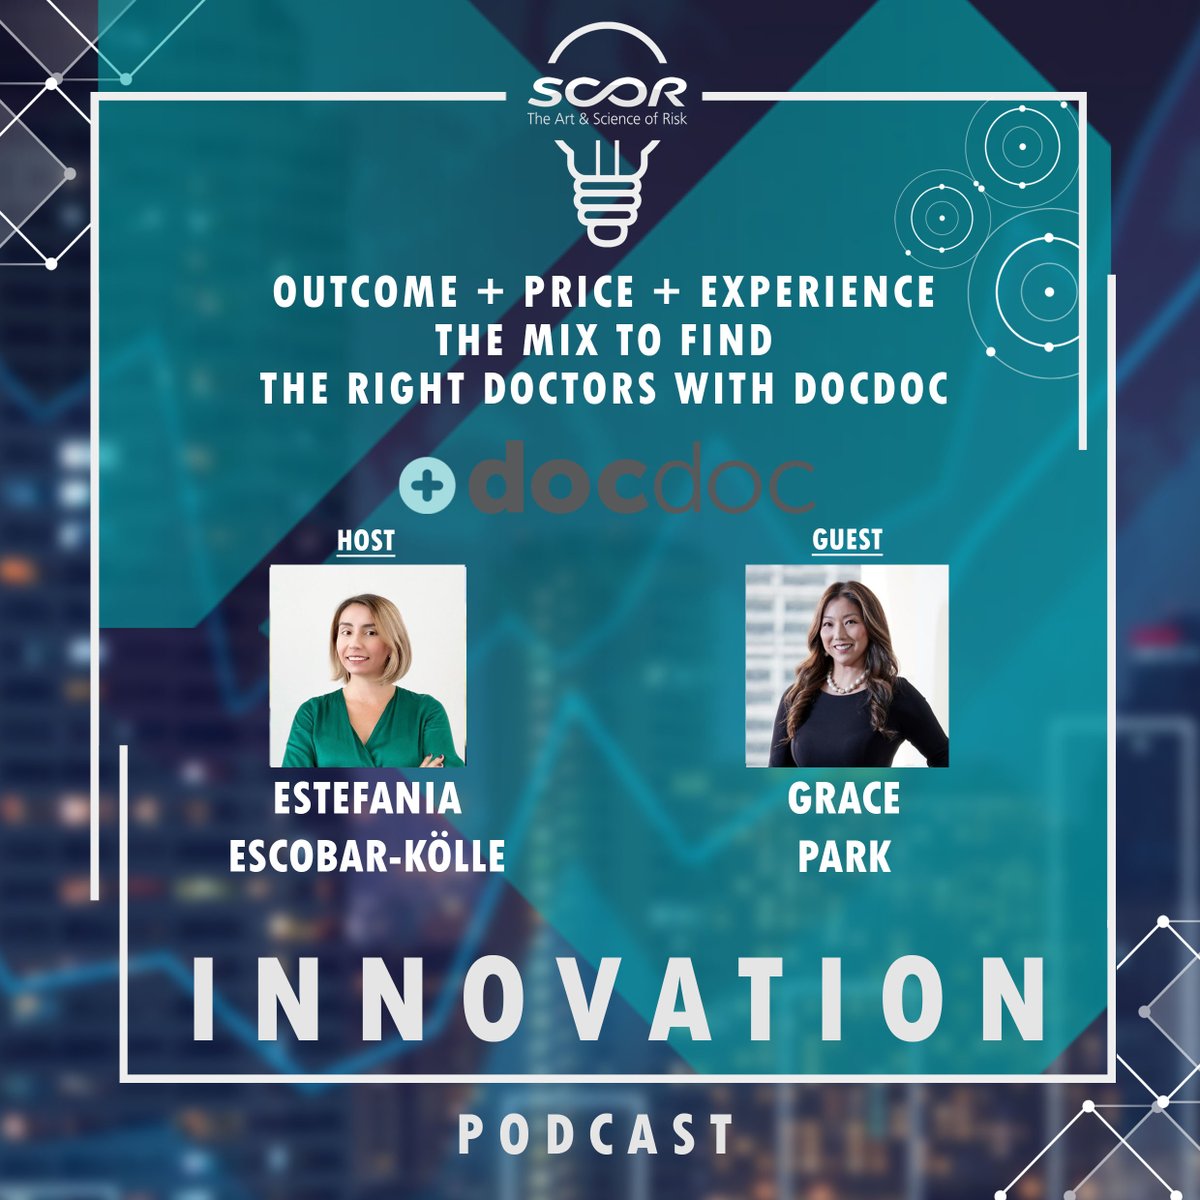 Our President @graceparkdocdoc sat down with @SCOR_SE to discuss DocDoc which provides transparency in healthcare.
#DocDoc #patientfirst #patientintelligence #insurance #insurtech #insurers #healthcare #interview #podcast #entrepreneur #femalefounders #womeninbusiness